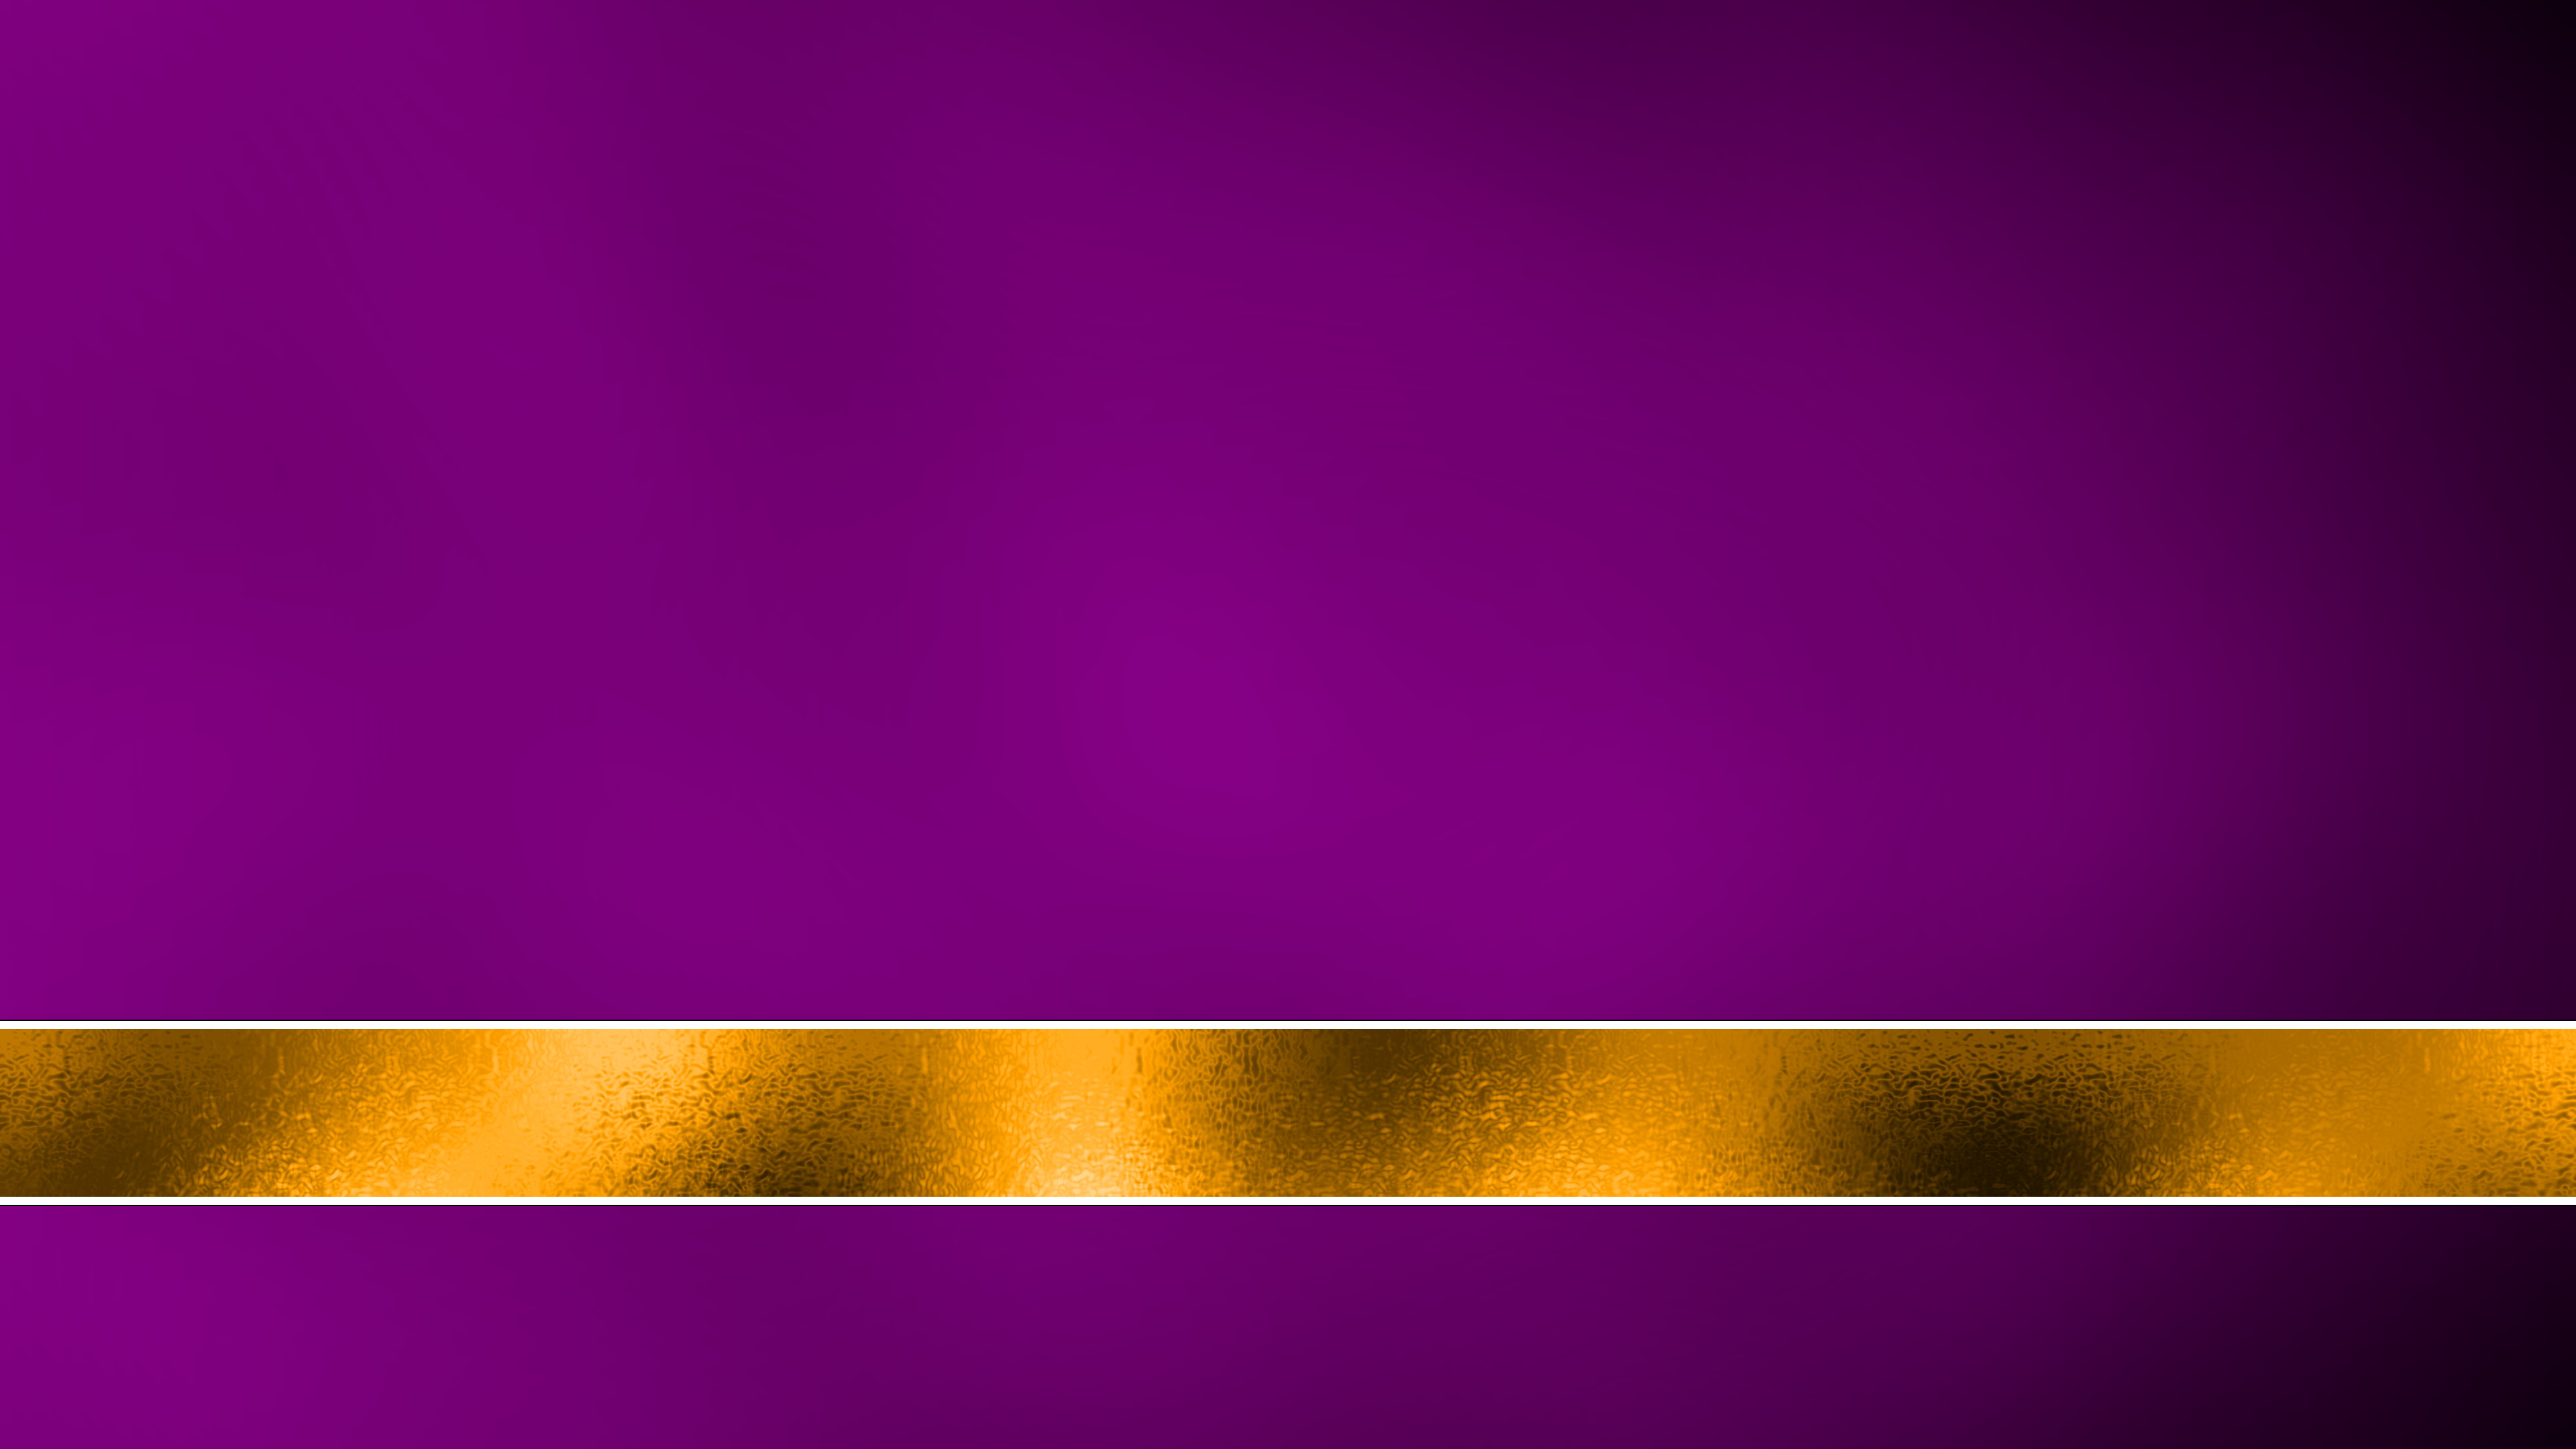 3840x2160 ... Purple and Gold 4k Wallpaper by SirLavaH